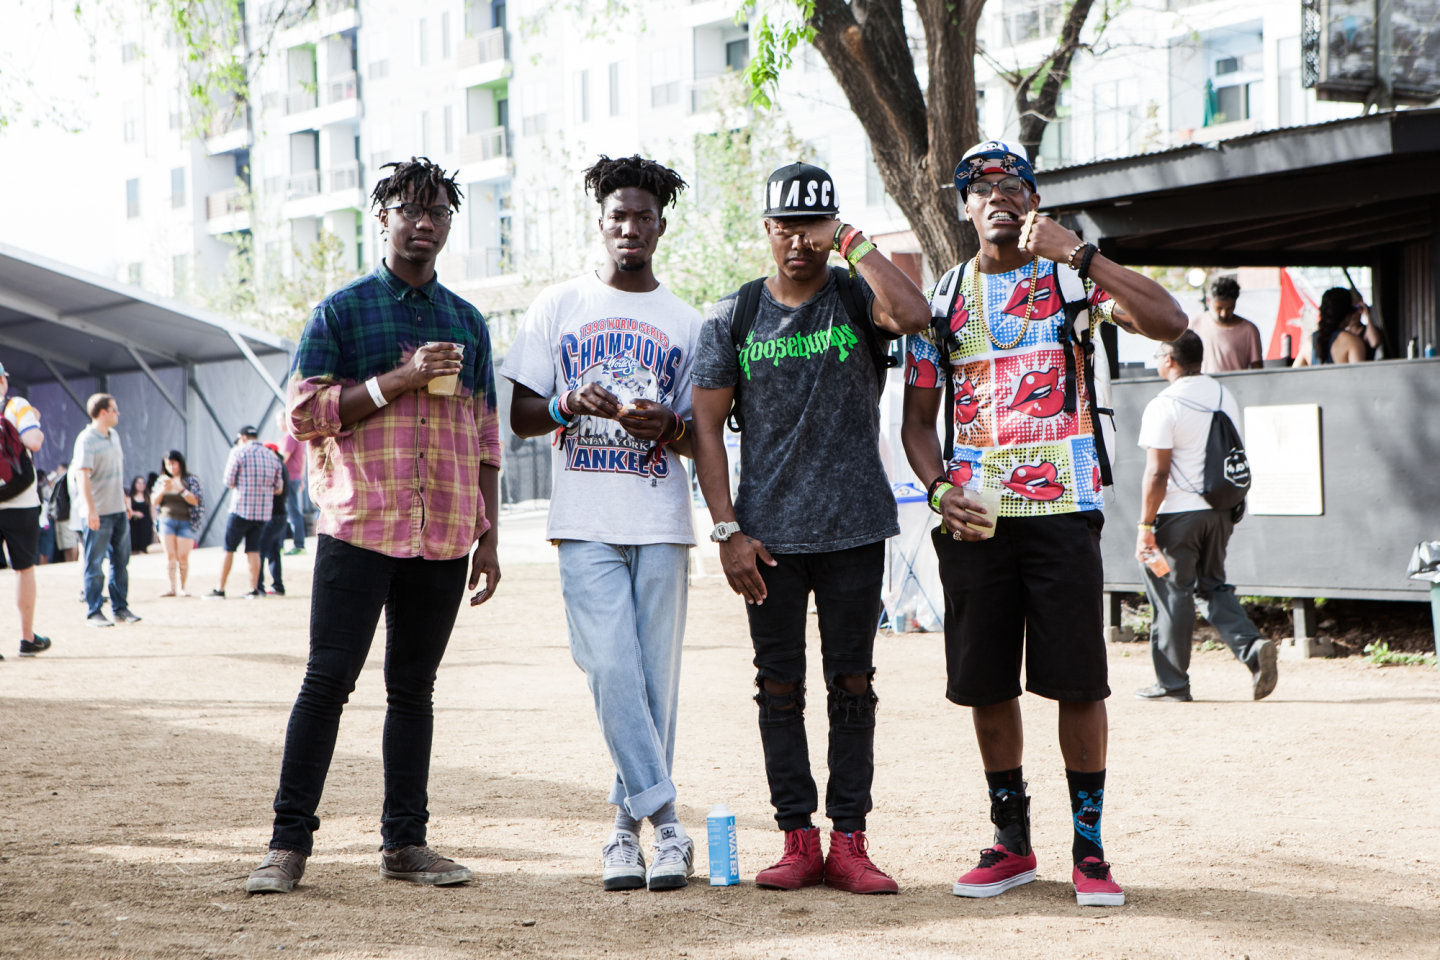 The 9 Most Stylish Squads At The FADER Fort